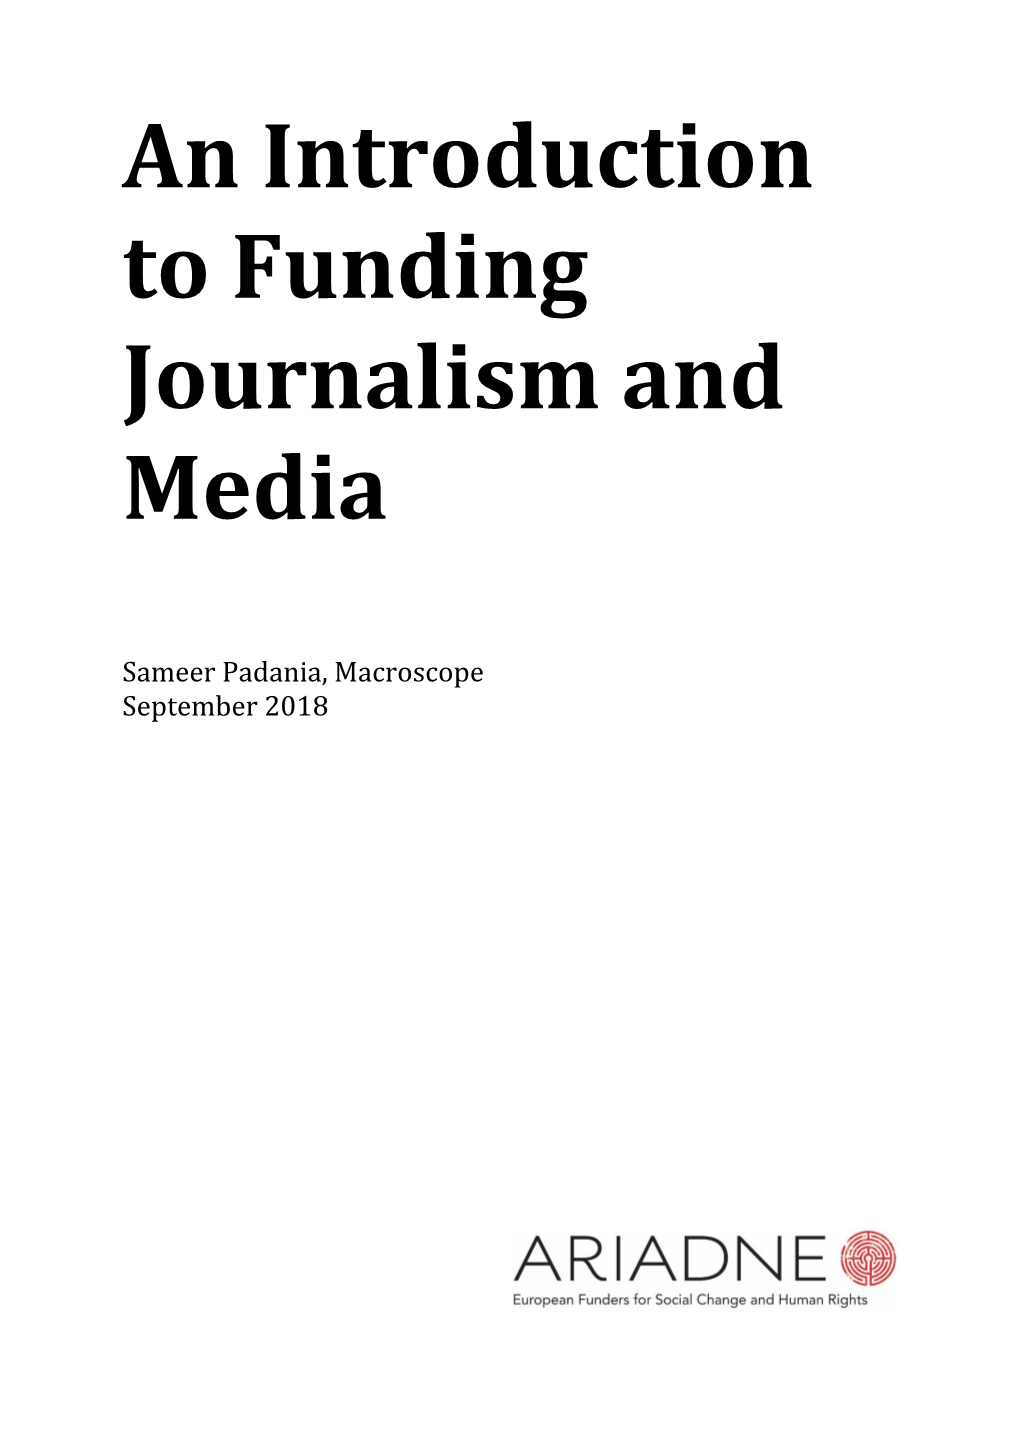 An Introduction to Funding Journalism and Media